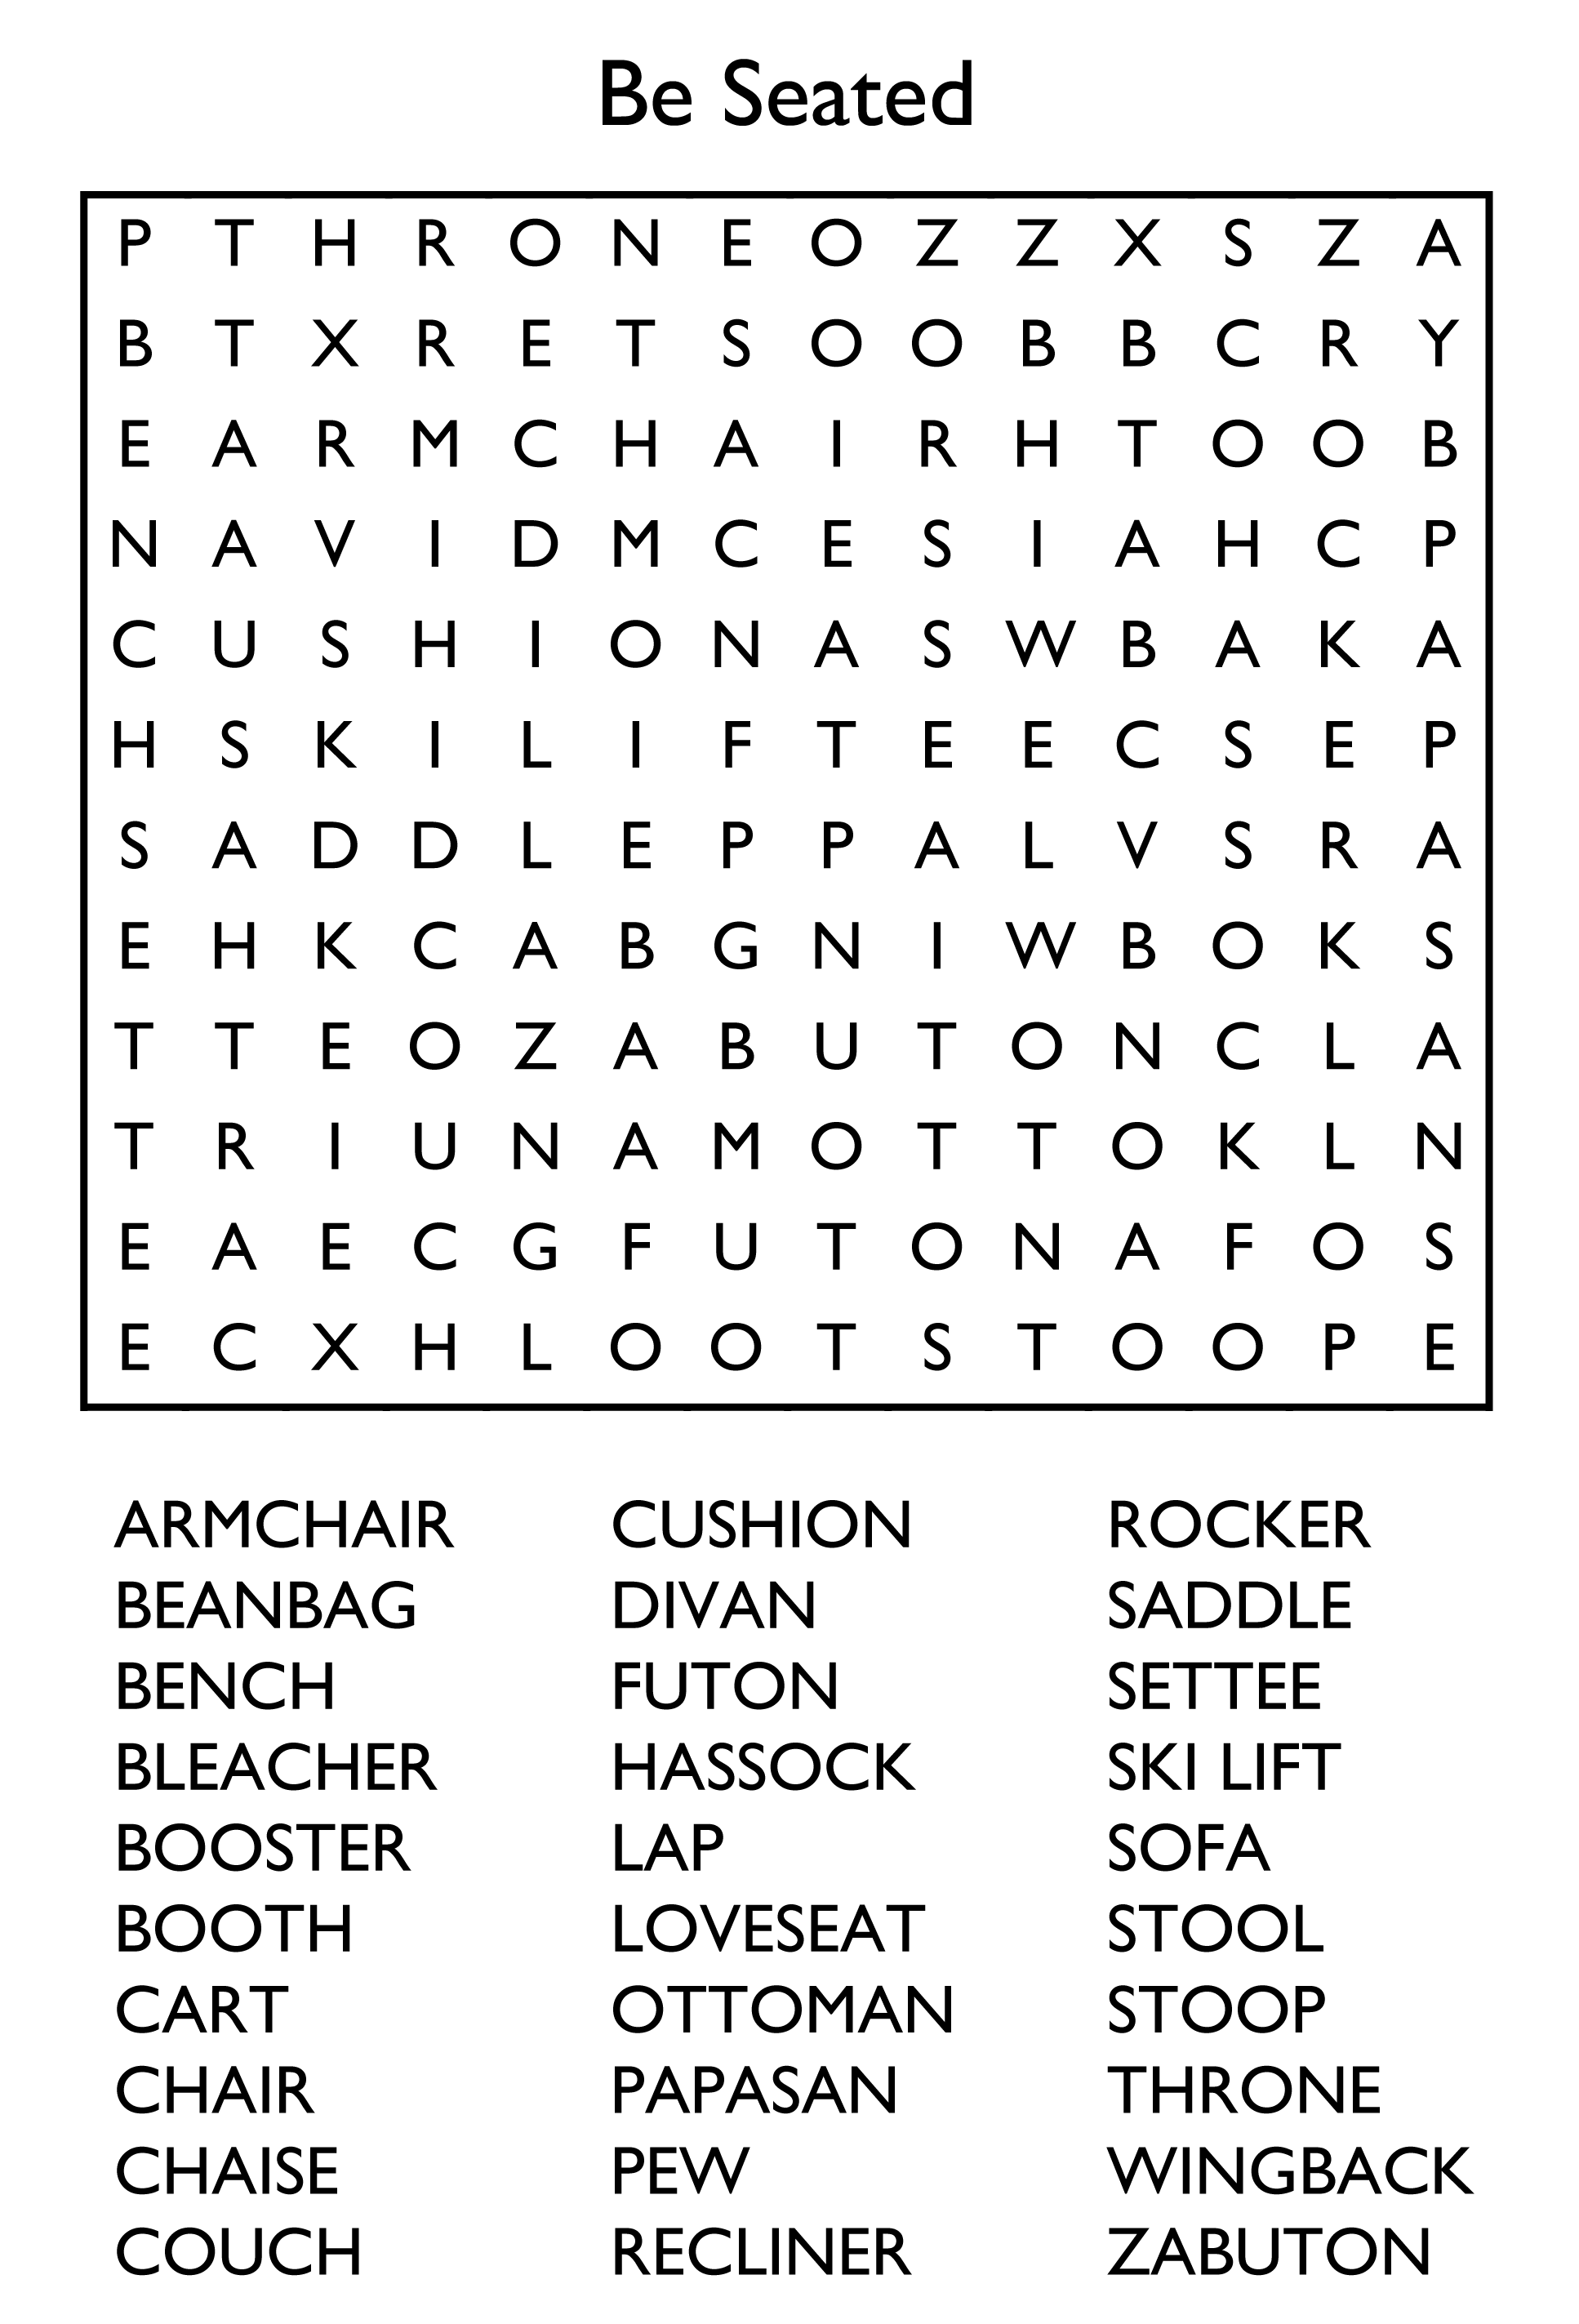 Free Printable Word Search Puzzle - Be Seated